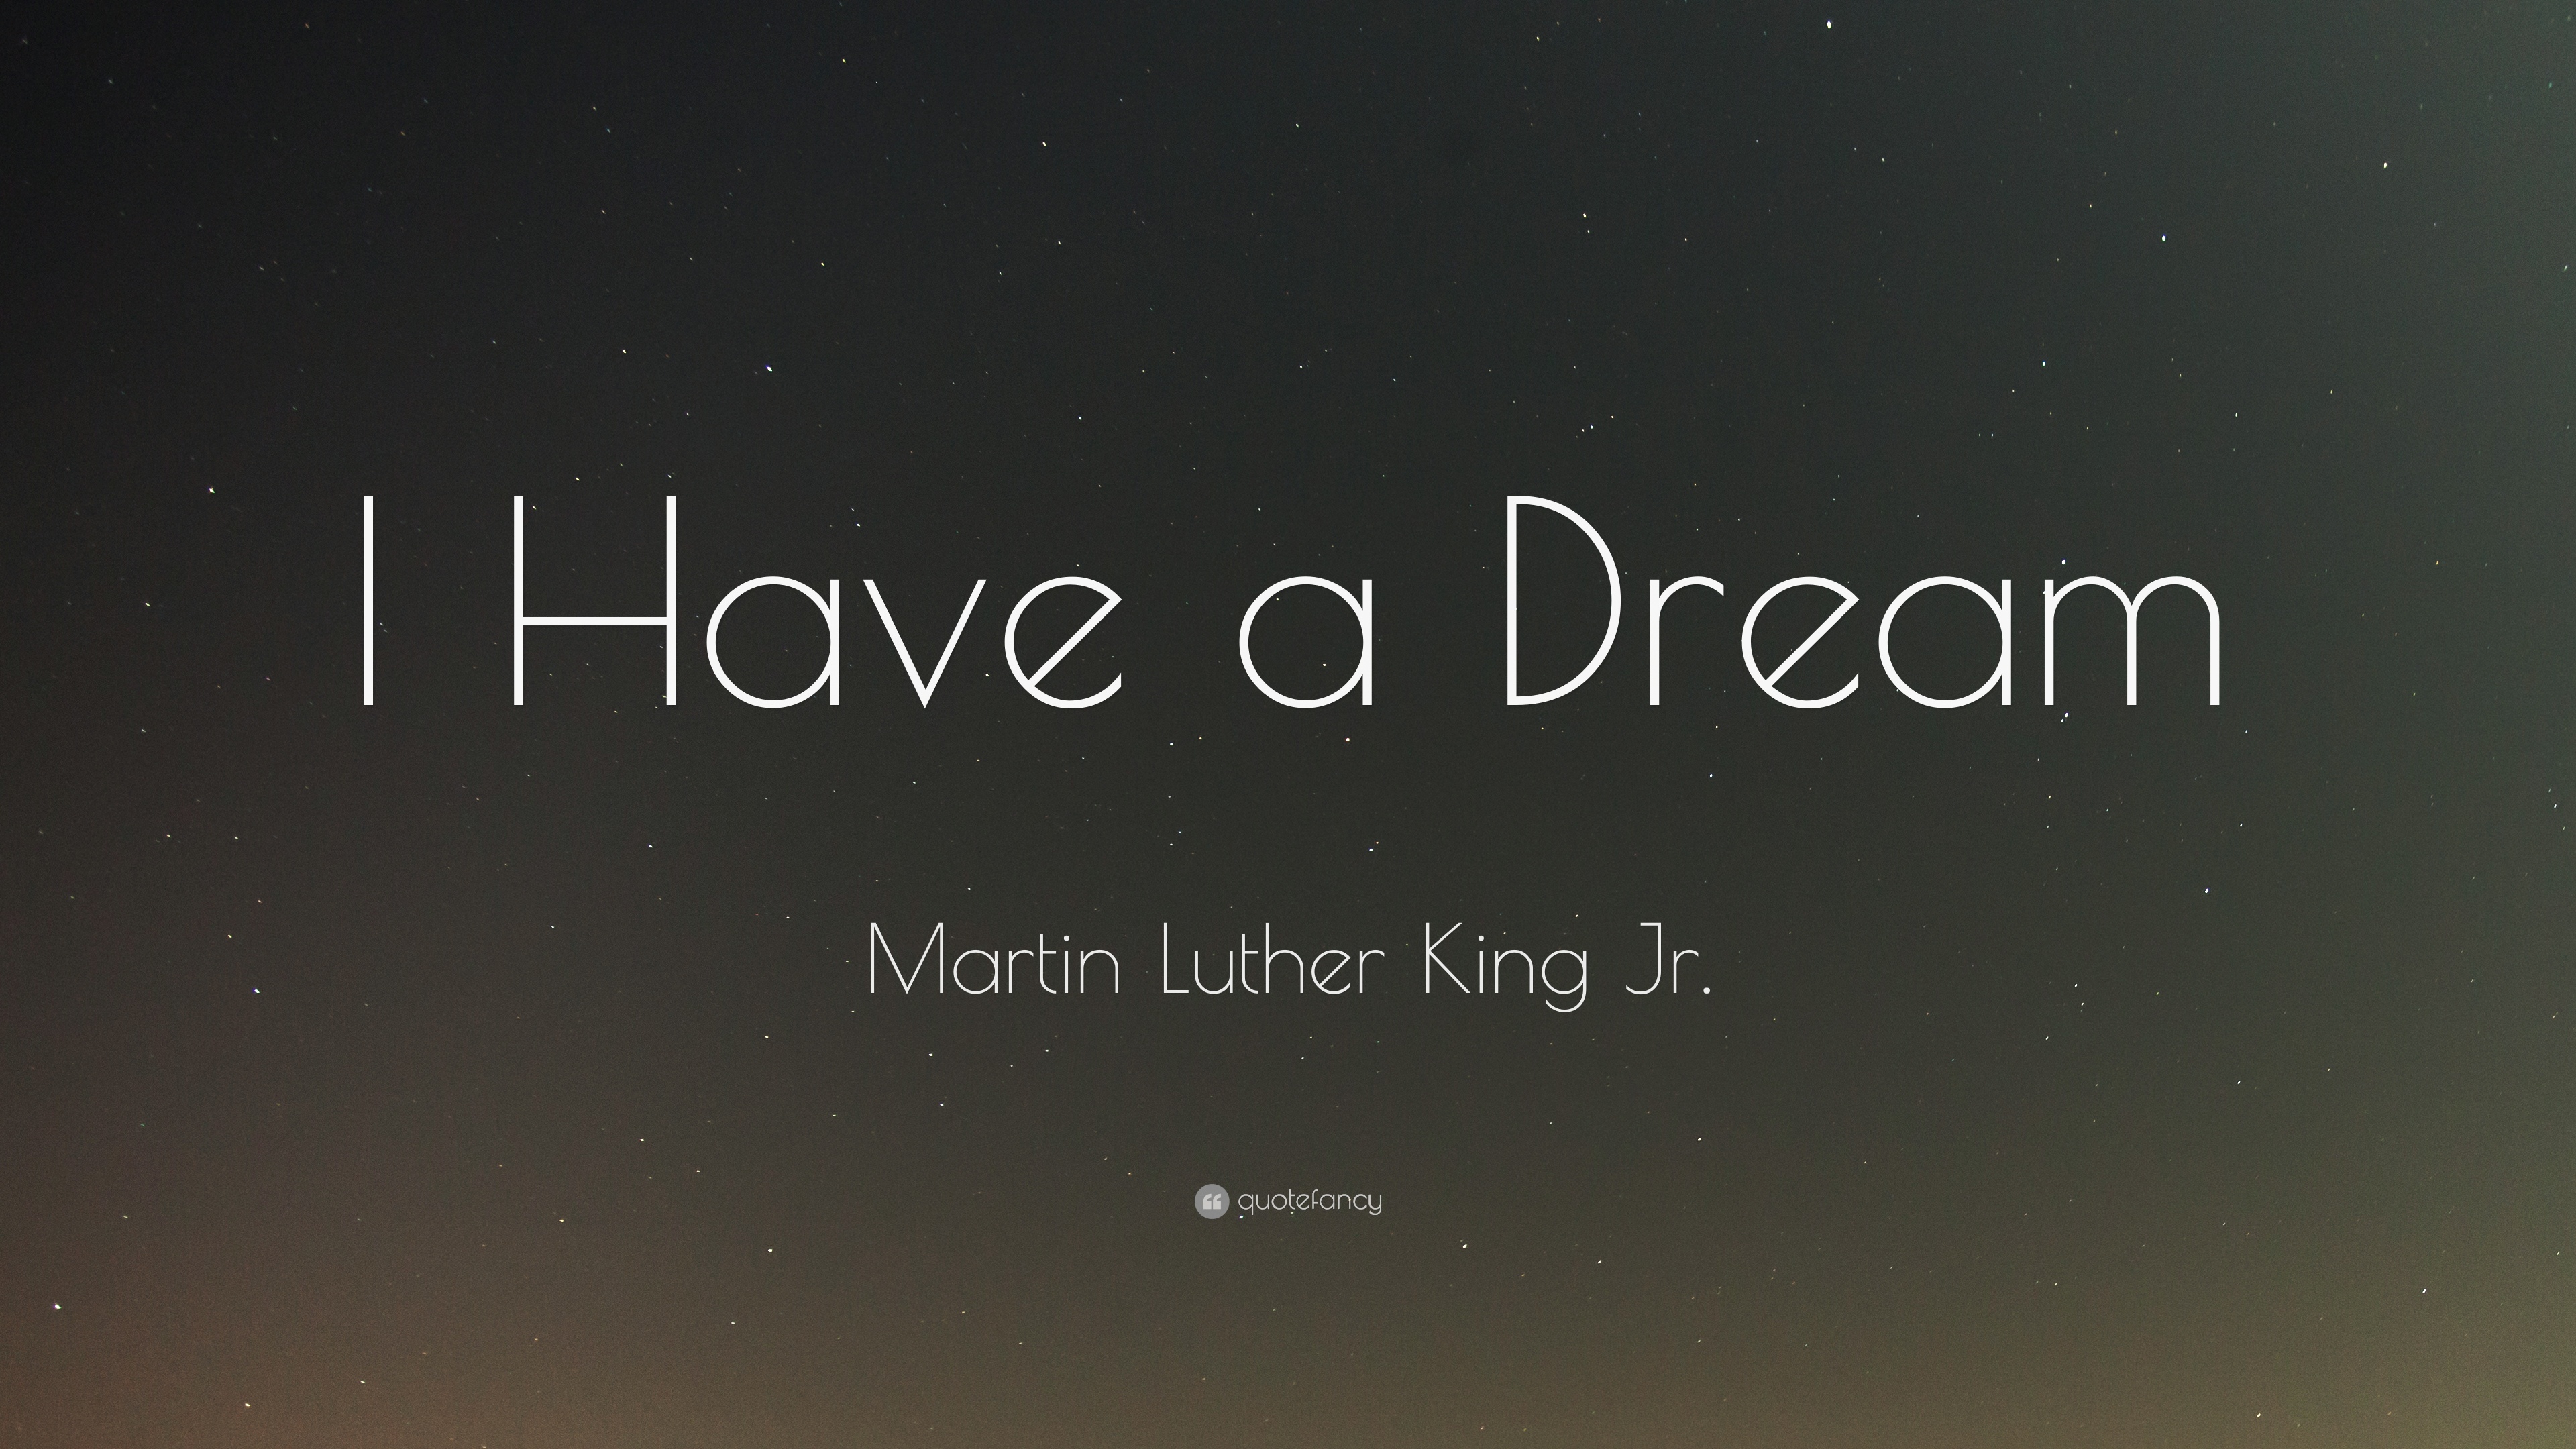 Martin Luther King Jr. Quote: “I Have a Dream” (9 wallpapers ...